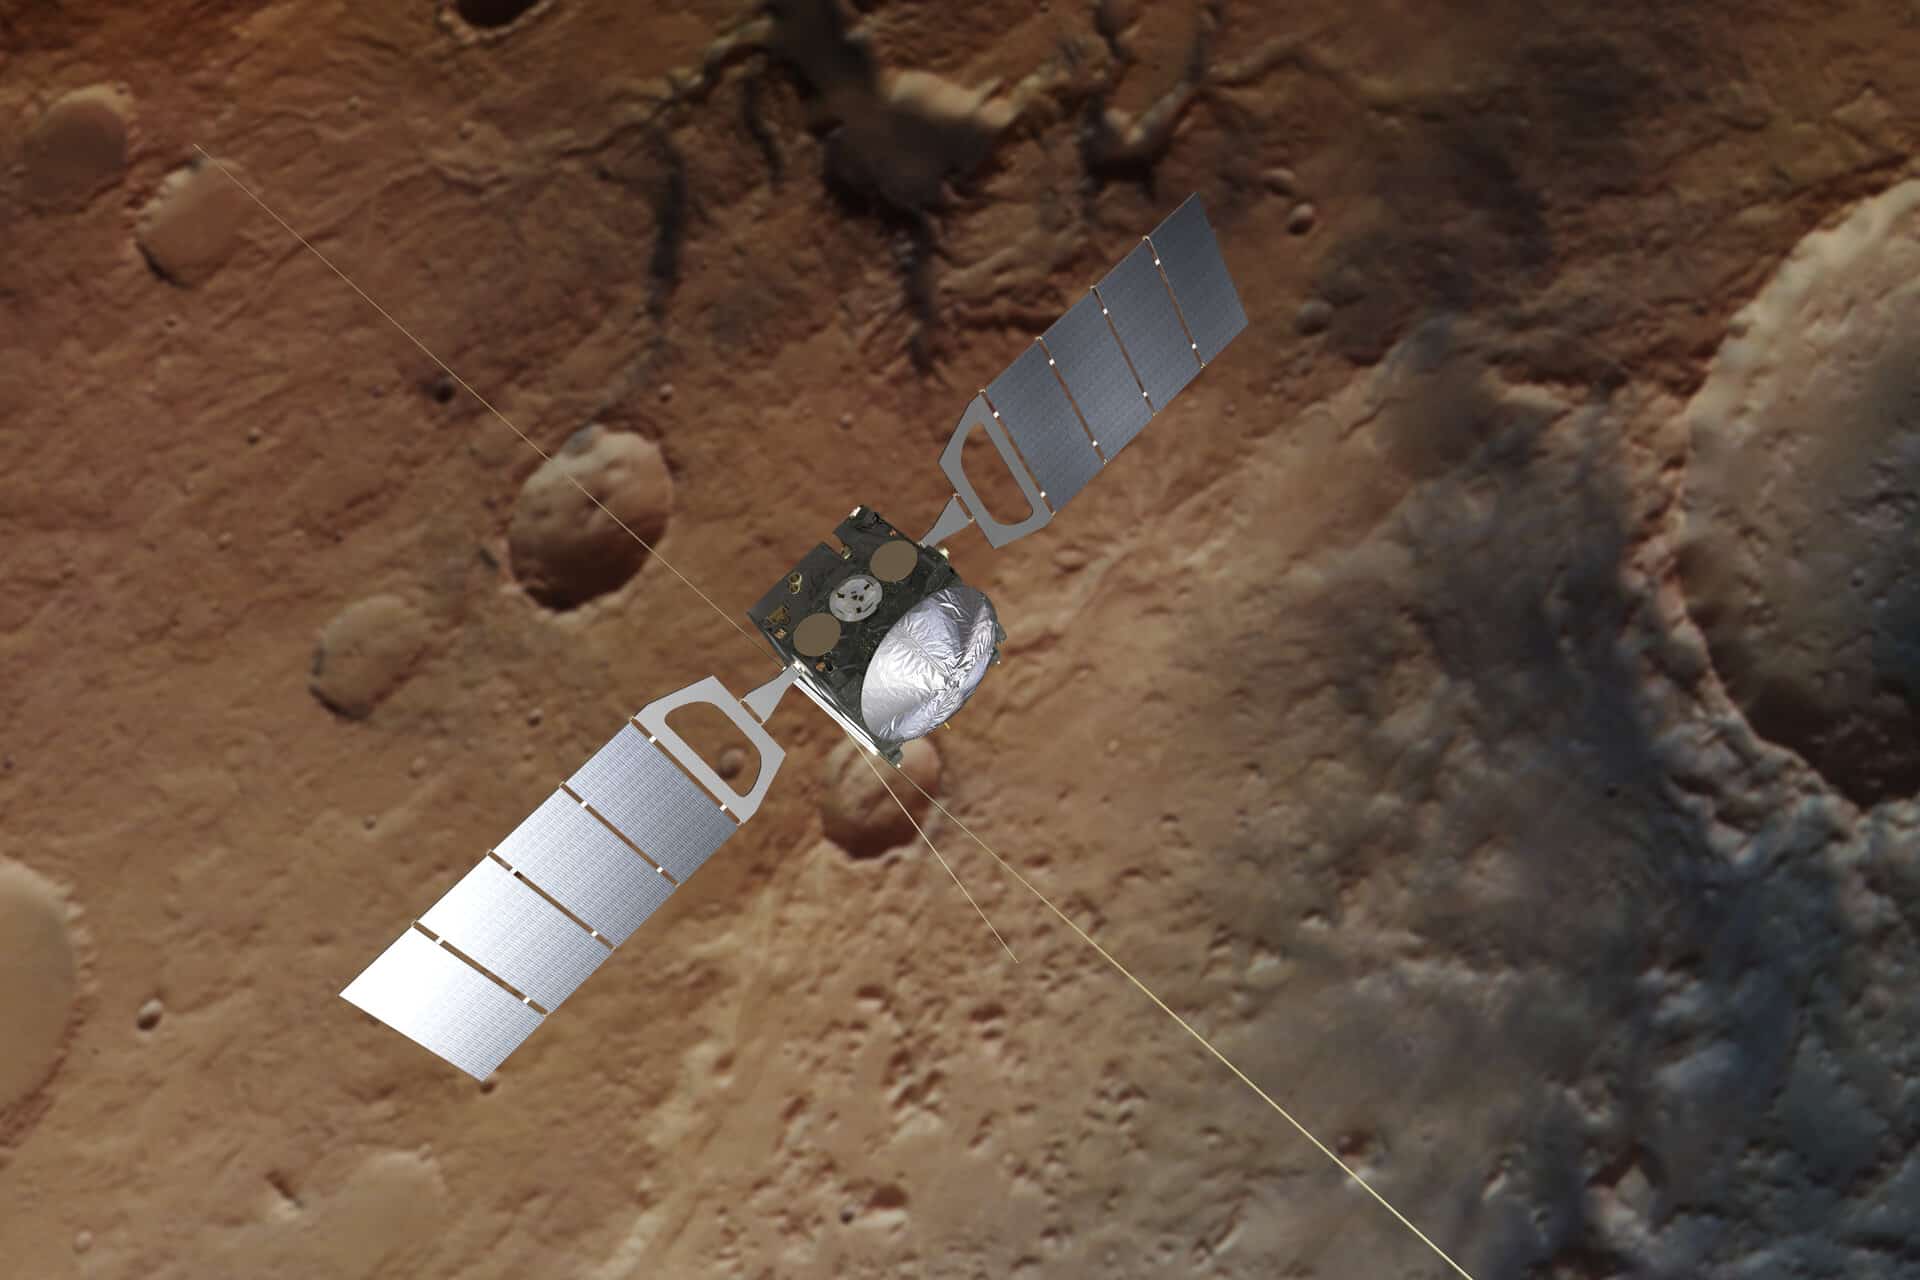 This Mars Orbiter Gets A Windows 98 Update, For The First Time In 19 Years Eyerys image